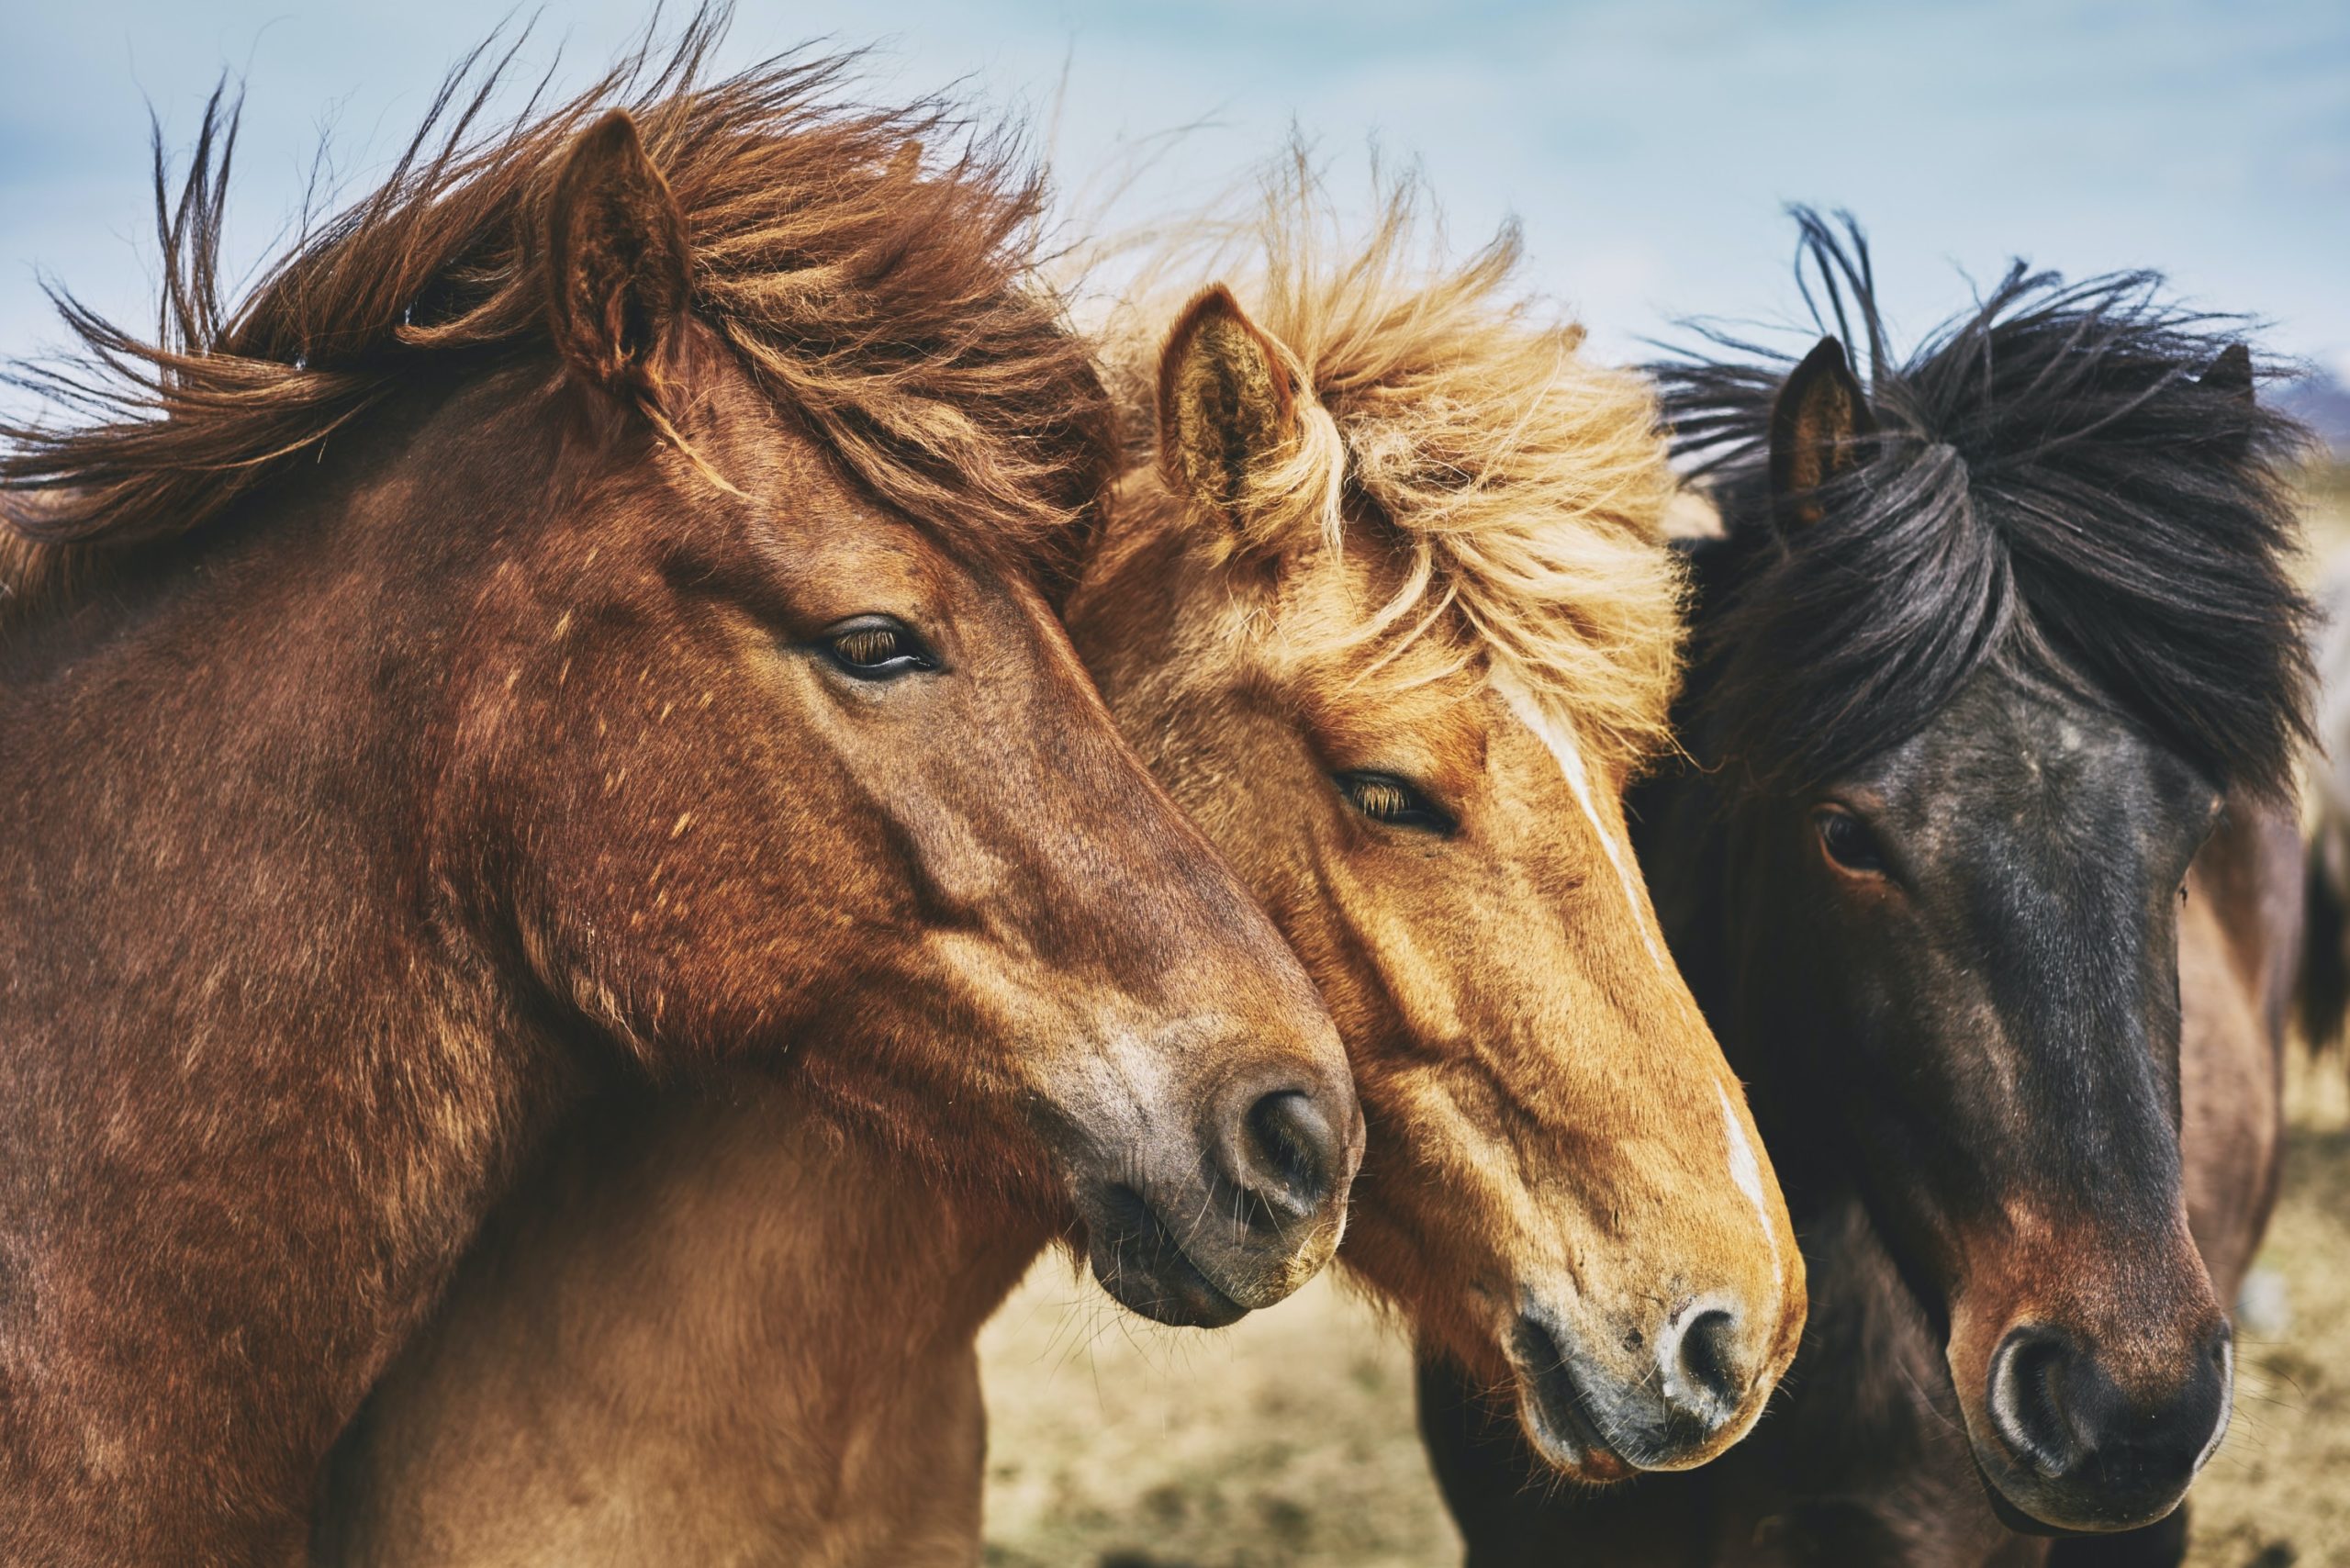 An in-depth research of horse breeds